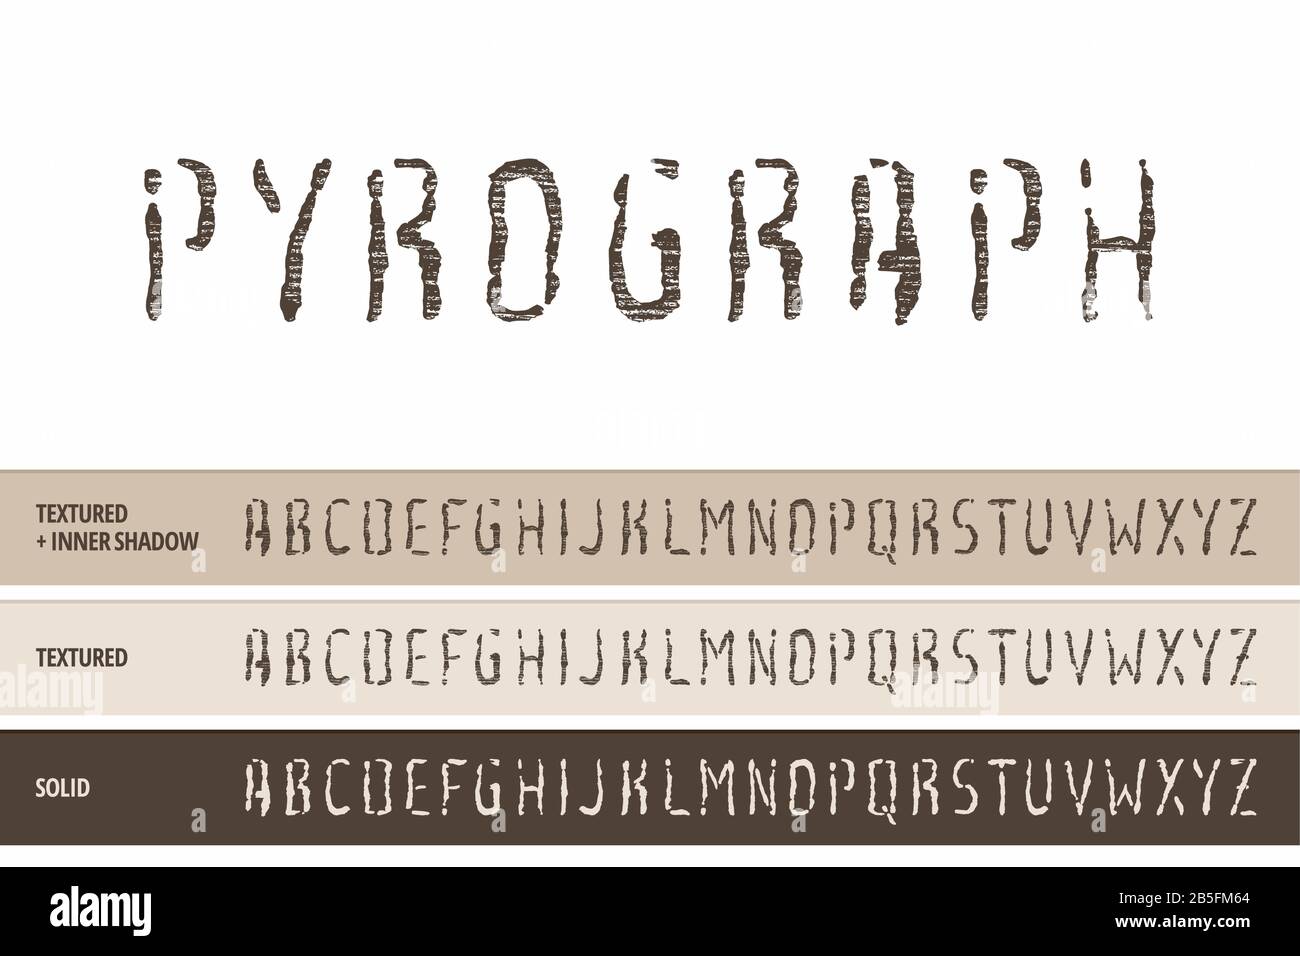 Wood Pyrography Typeface (Vector Font). Letter Press, Stamp, Wood Relief, Cut and Carving (Textured Typography). Stock Vector